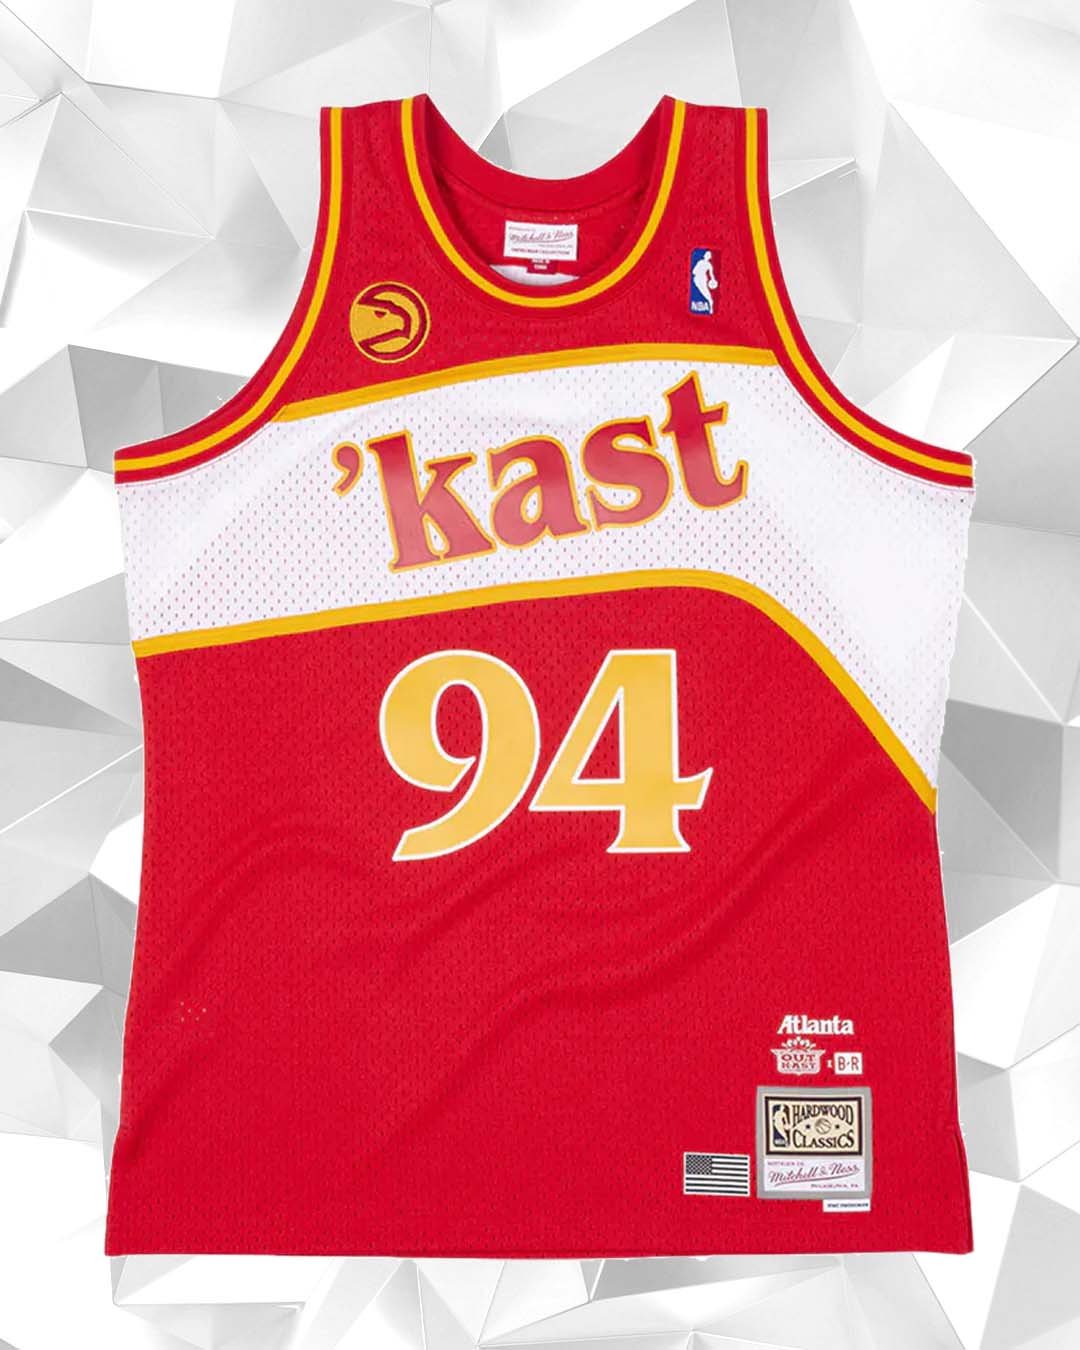 So I teamed up with Atlanta Hawks and Mitchell & Ness, I created my own  jersey.. Coming soon ❗️❗️🔥🔥 #NBARemix